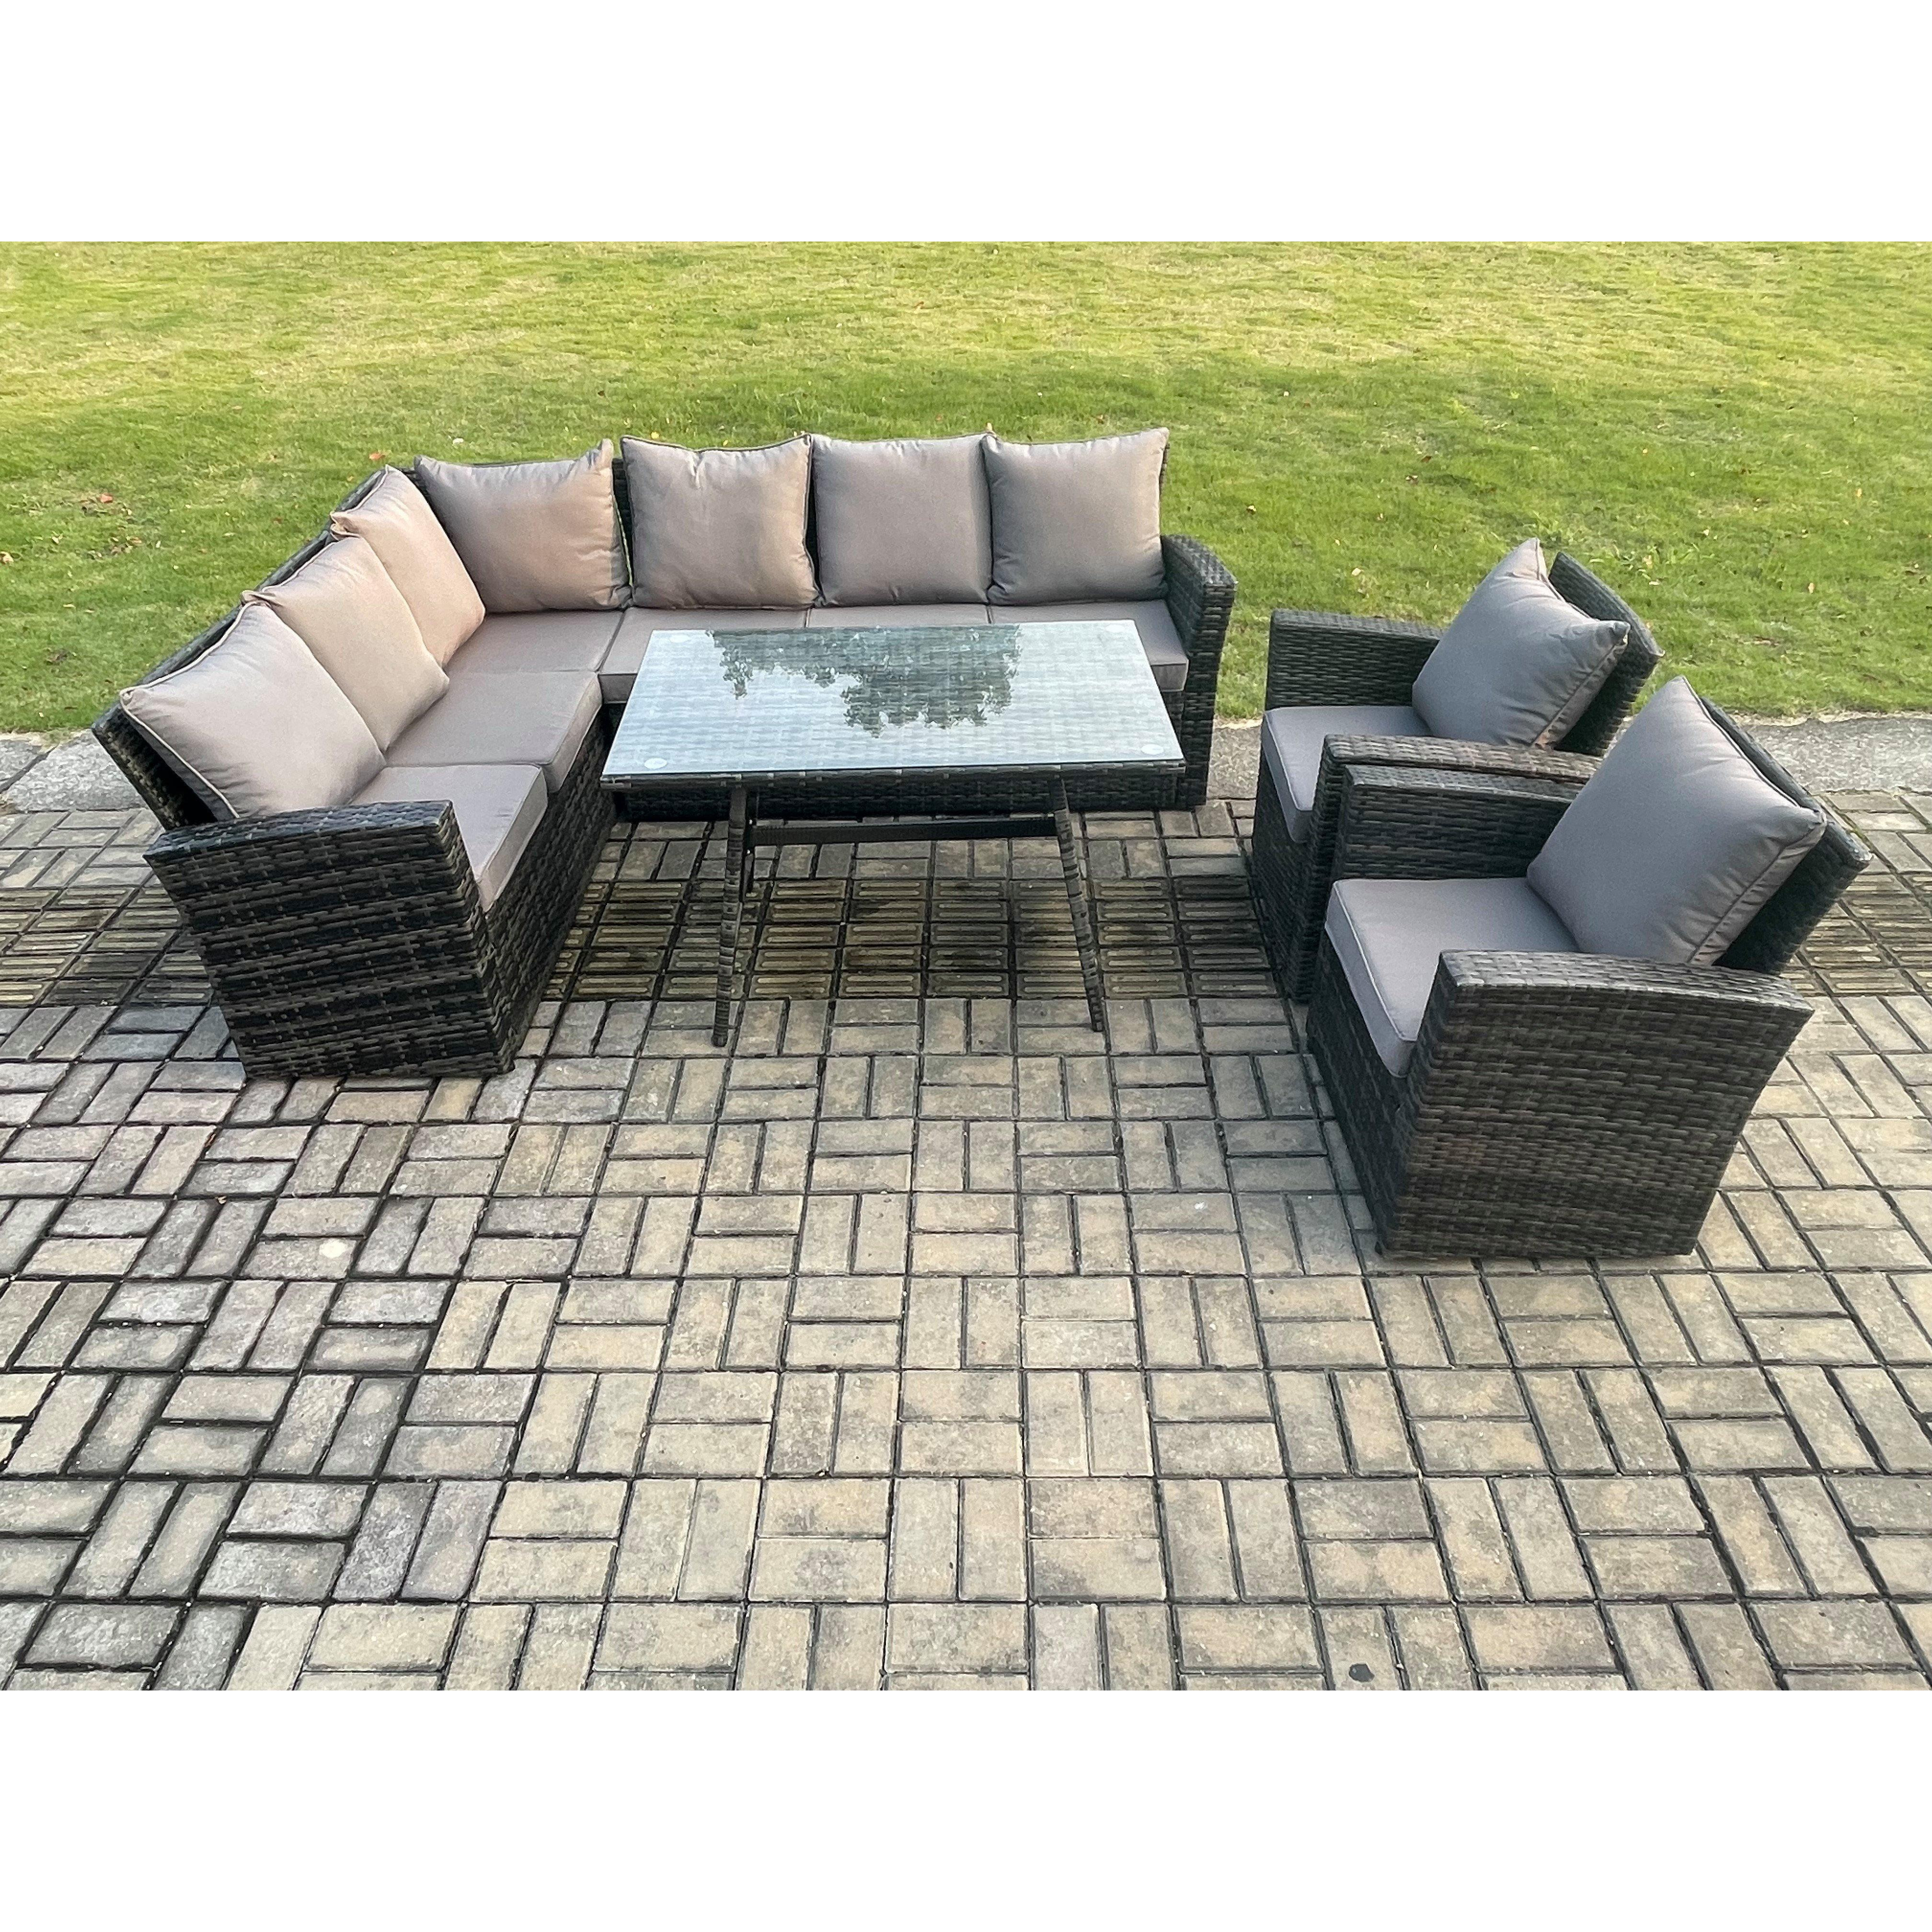 High Back Outdoor Garden Furniture Set Rattan Corner Sofa Dining Table Set With 2 Armchairs 8 Seater - image 1